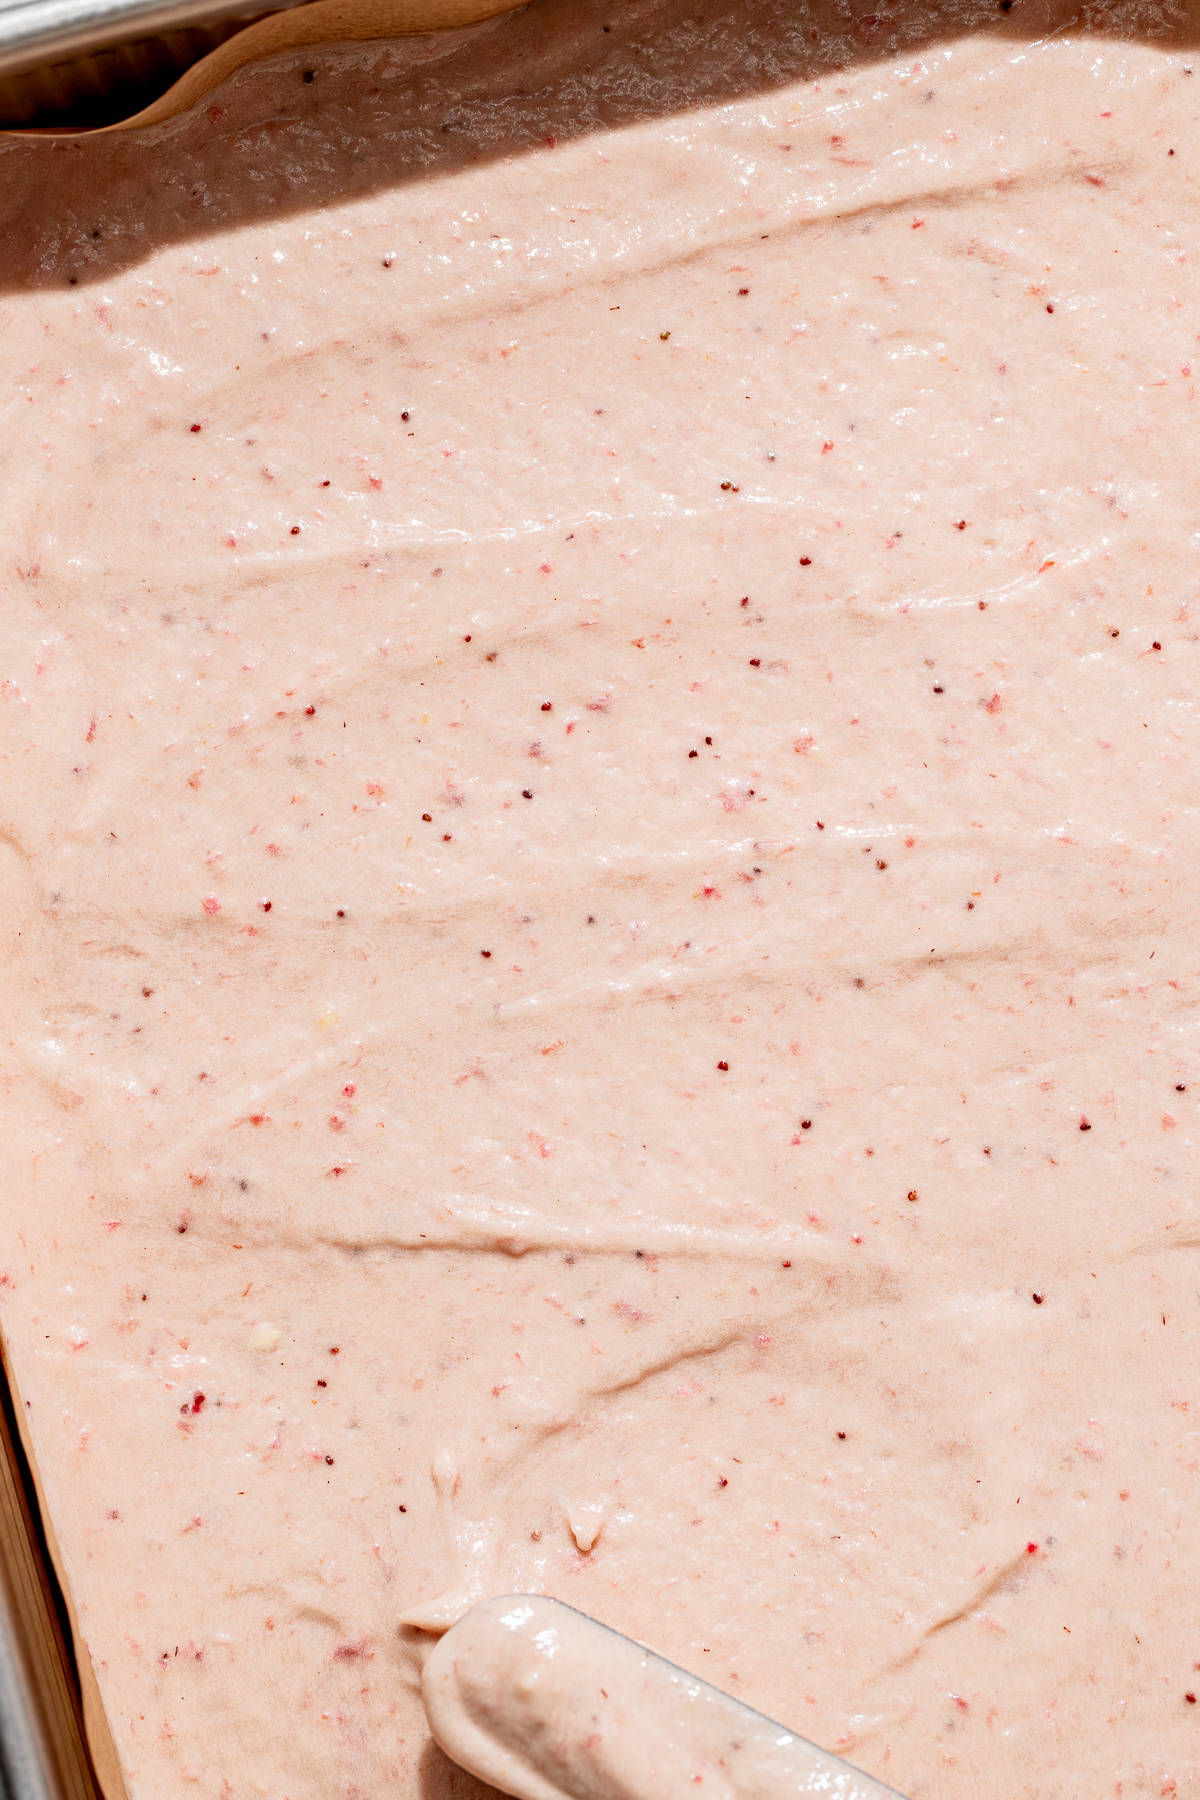 strawberry cake batter spread into baking pan.